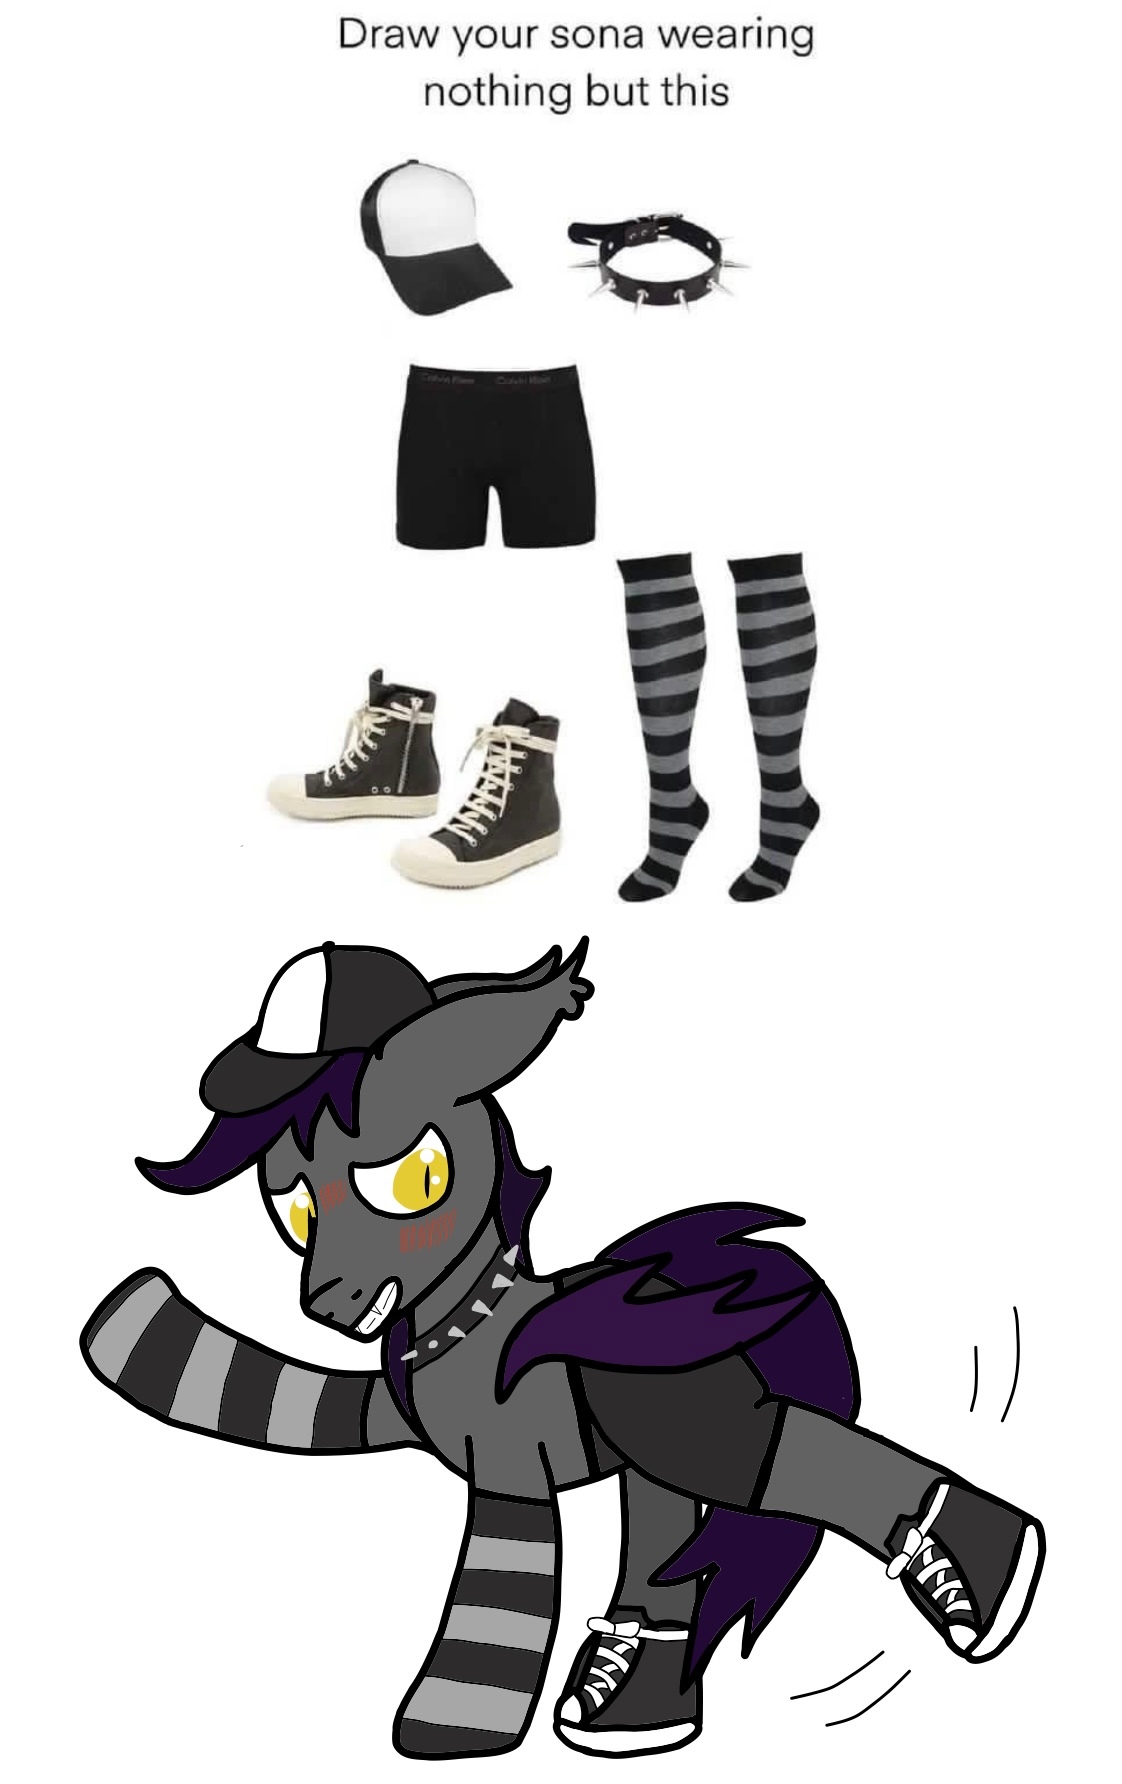 OC] Don't tell anyone, but I own Shadow's shoes IRL : r